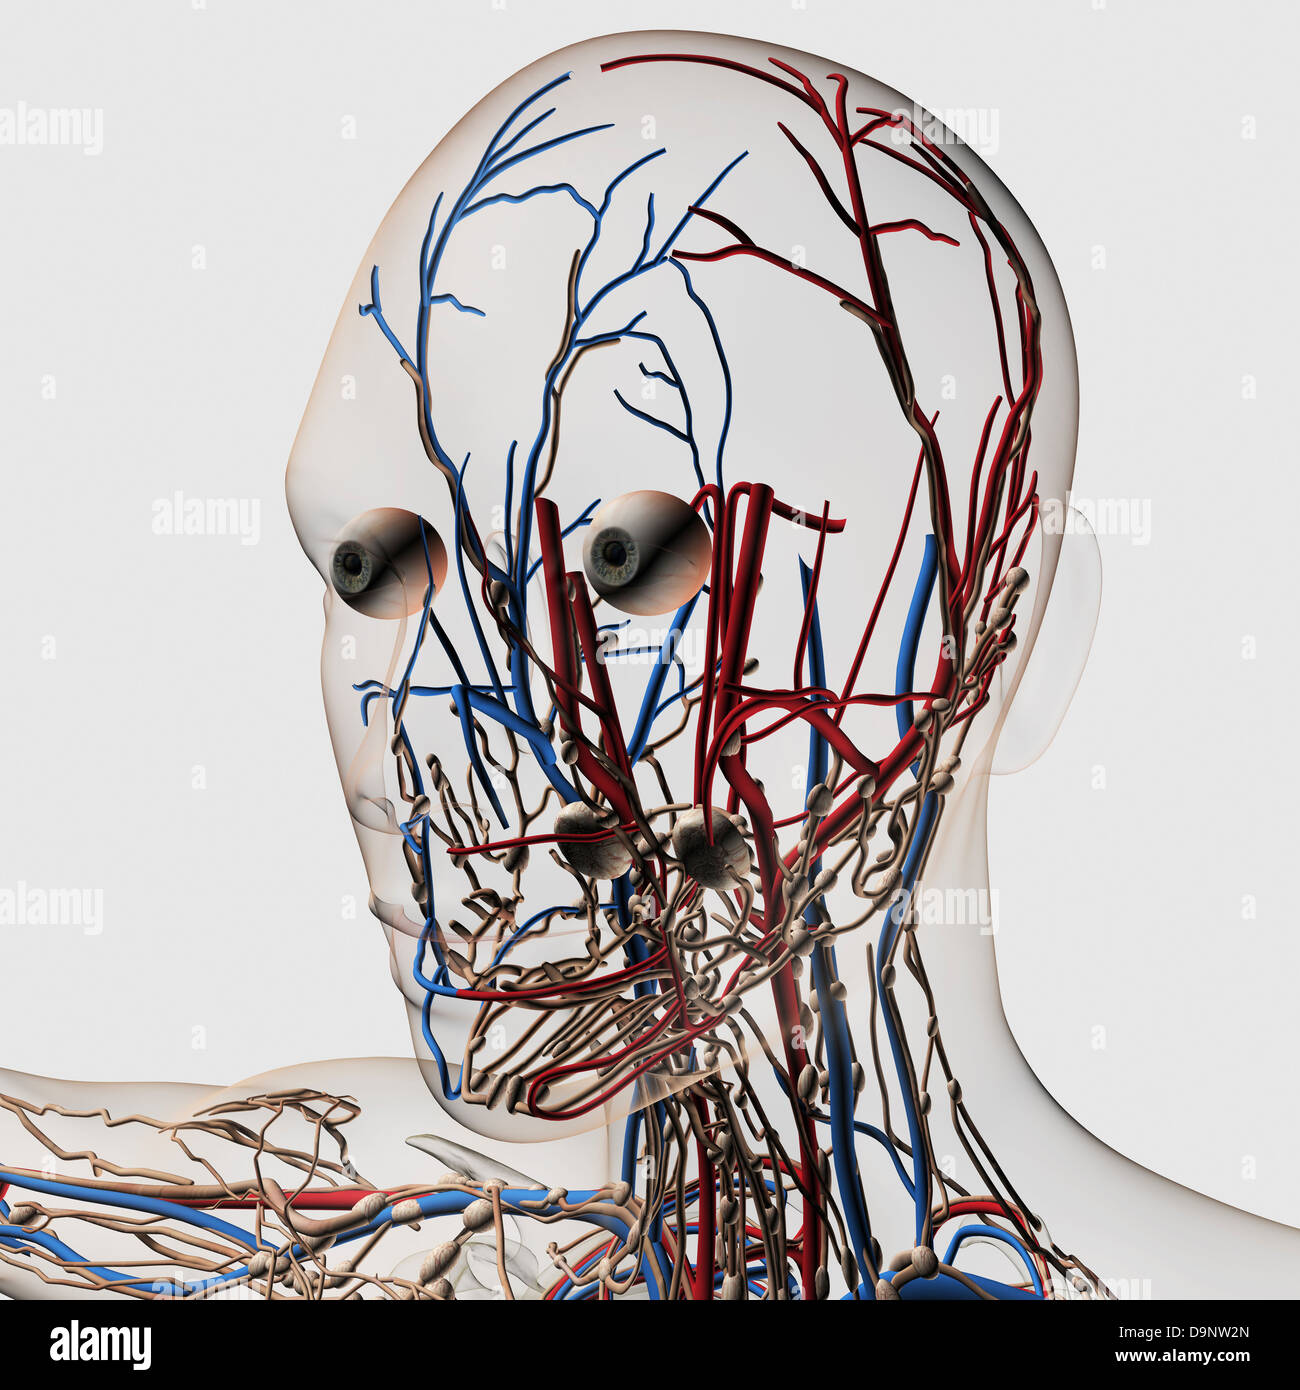 Medical illustration of head arteries, veins and lymphatic system, front view. Stock Photo